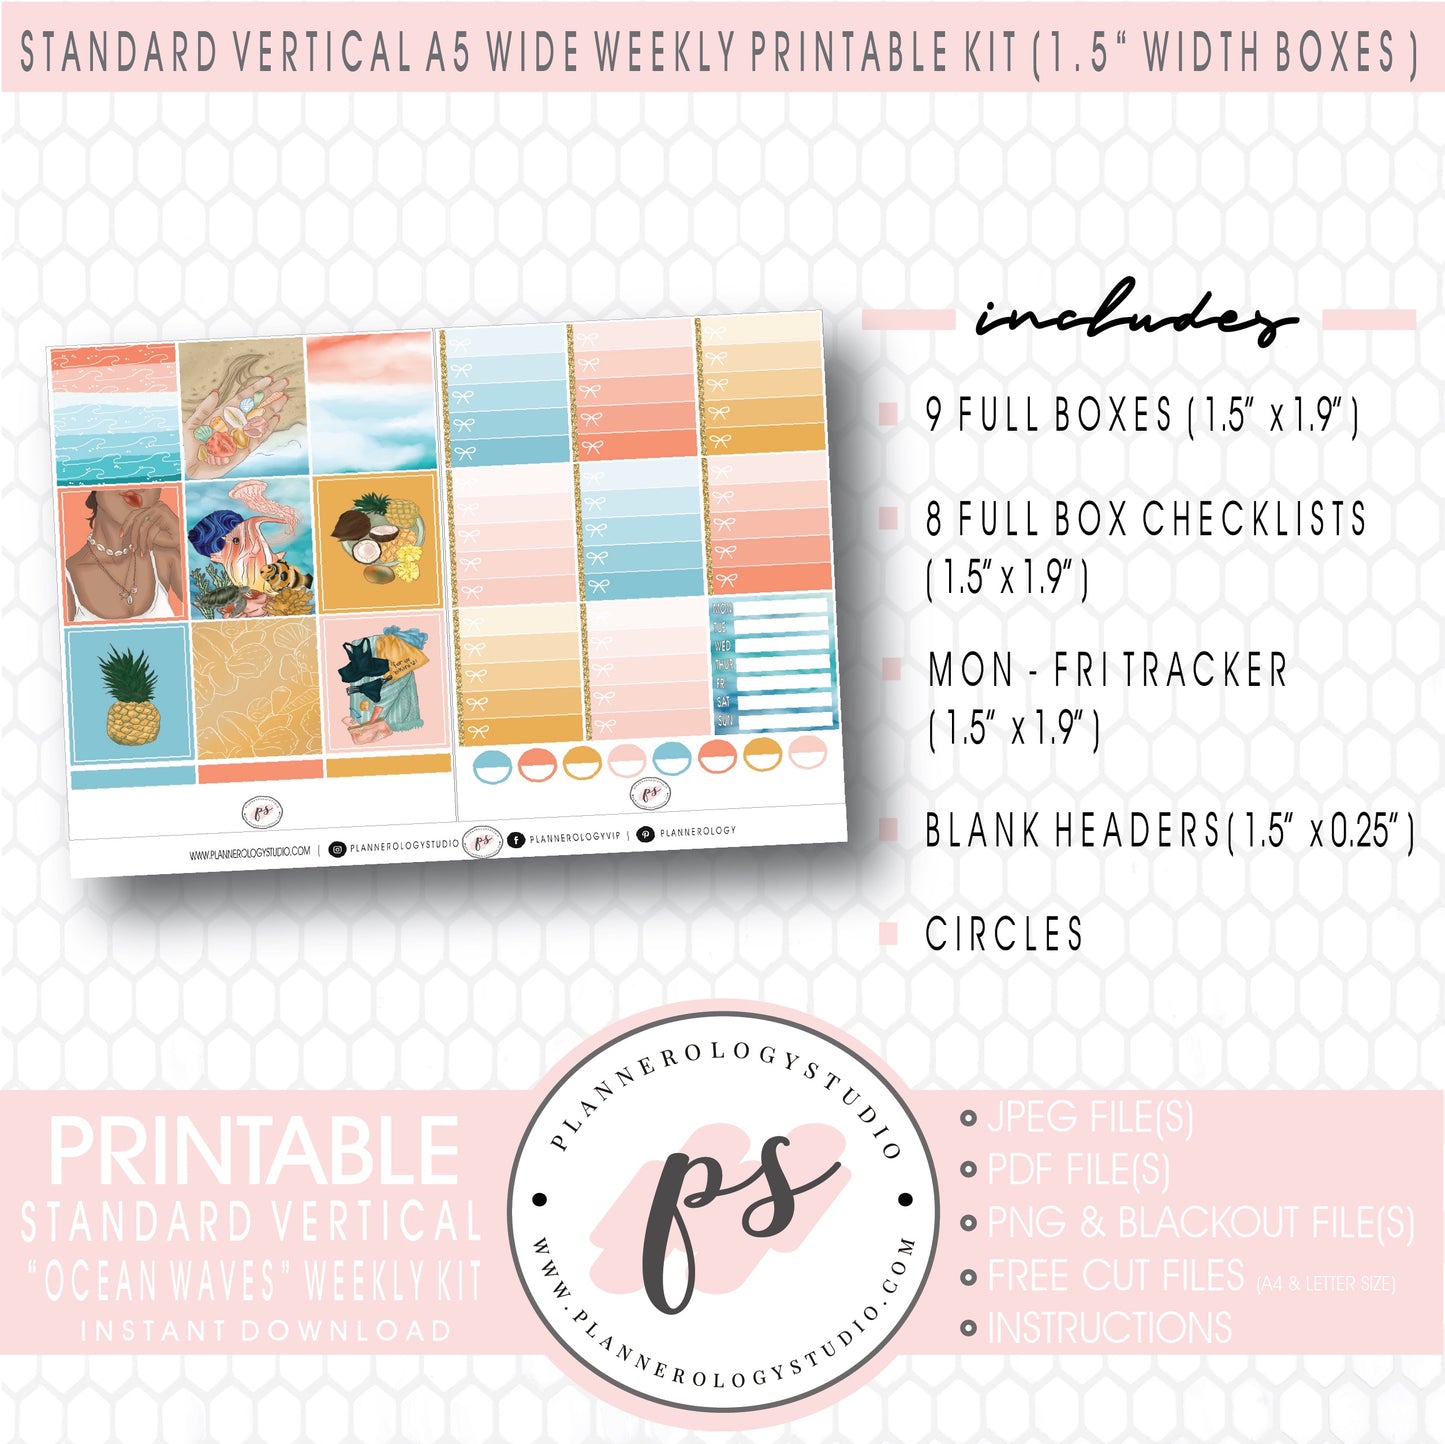 Ocean Waves Weekly Digital Printable Planner Stickers Kit (for use with Standard Vertical A5 Wide Planners)